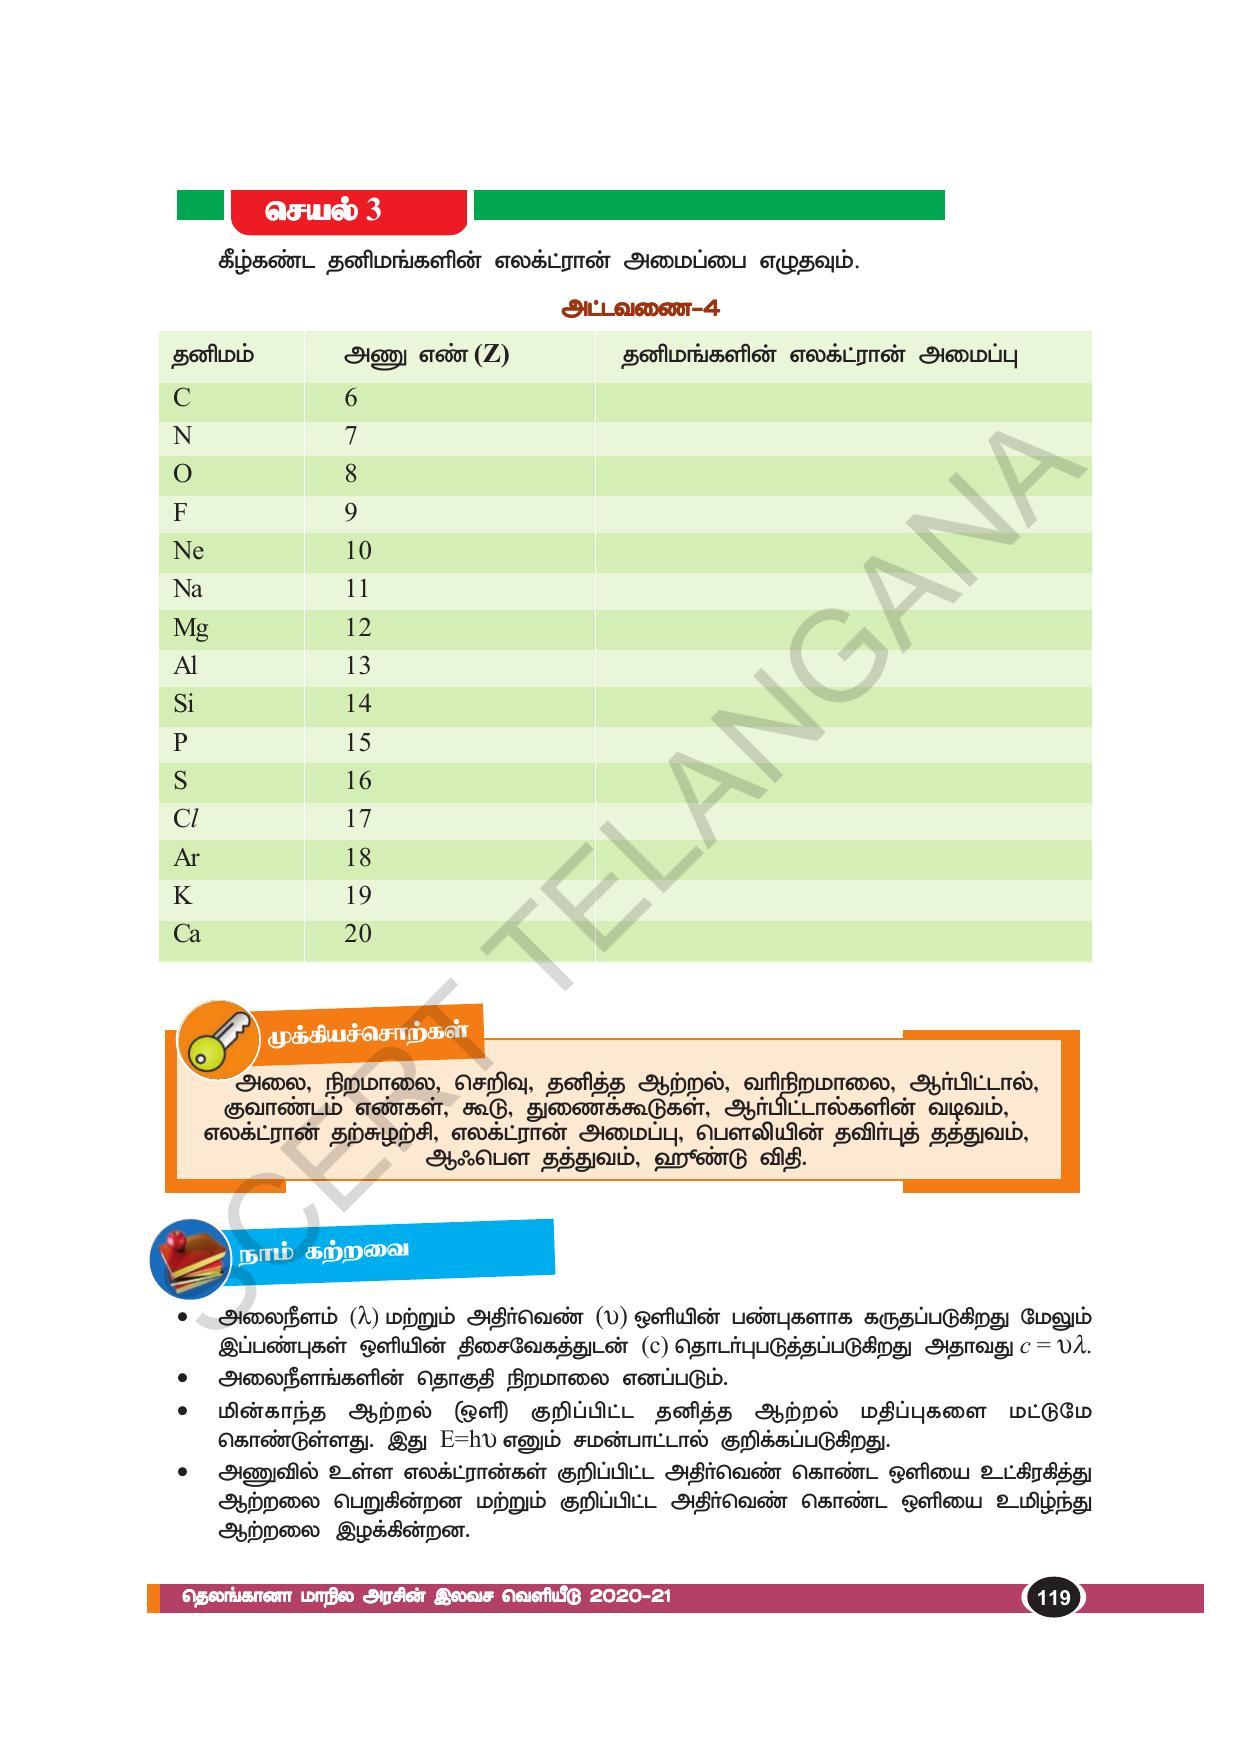 TS SCERT Class 10 Physical Science(Tamil Medium) Text Book - Page 131